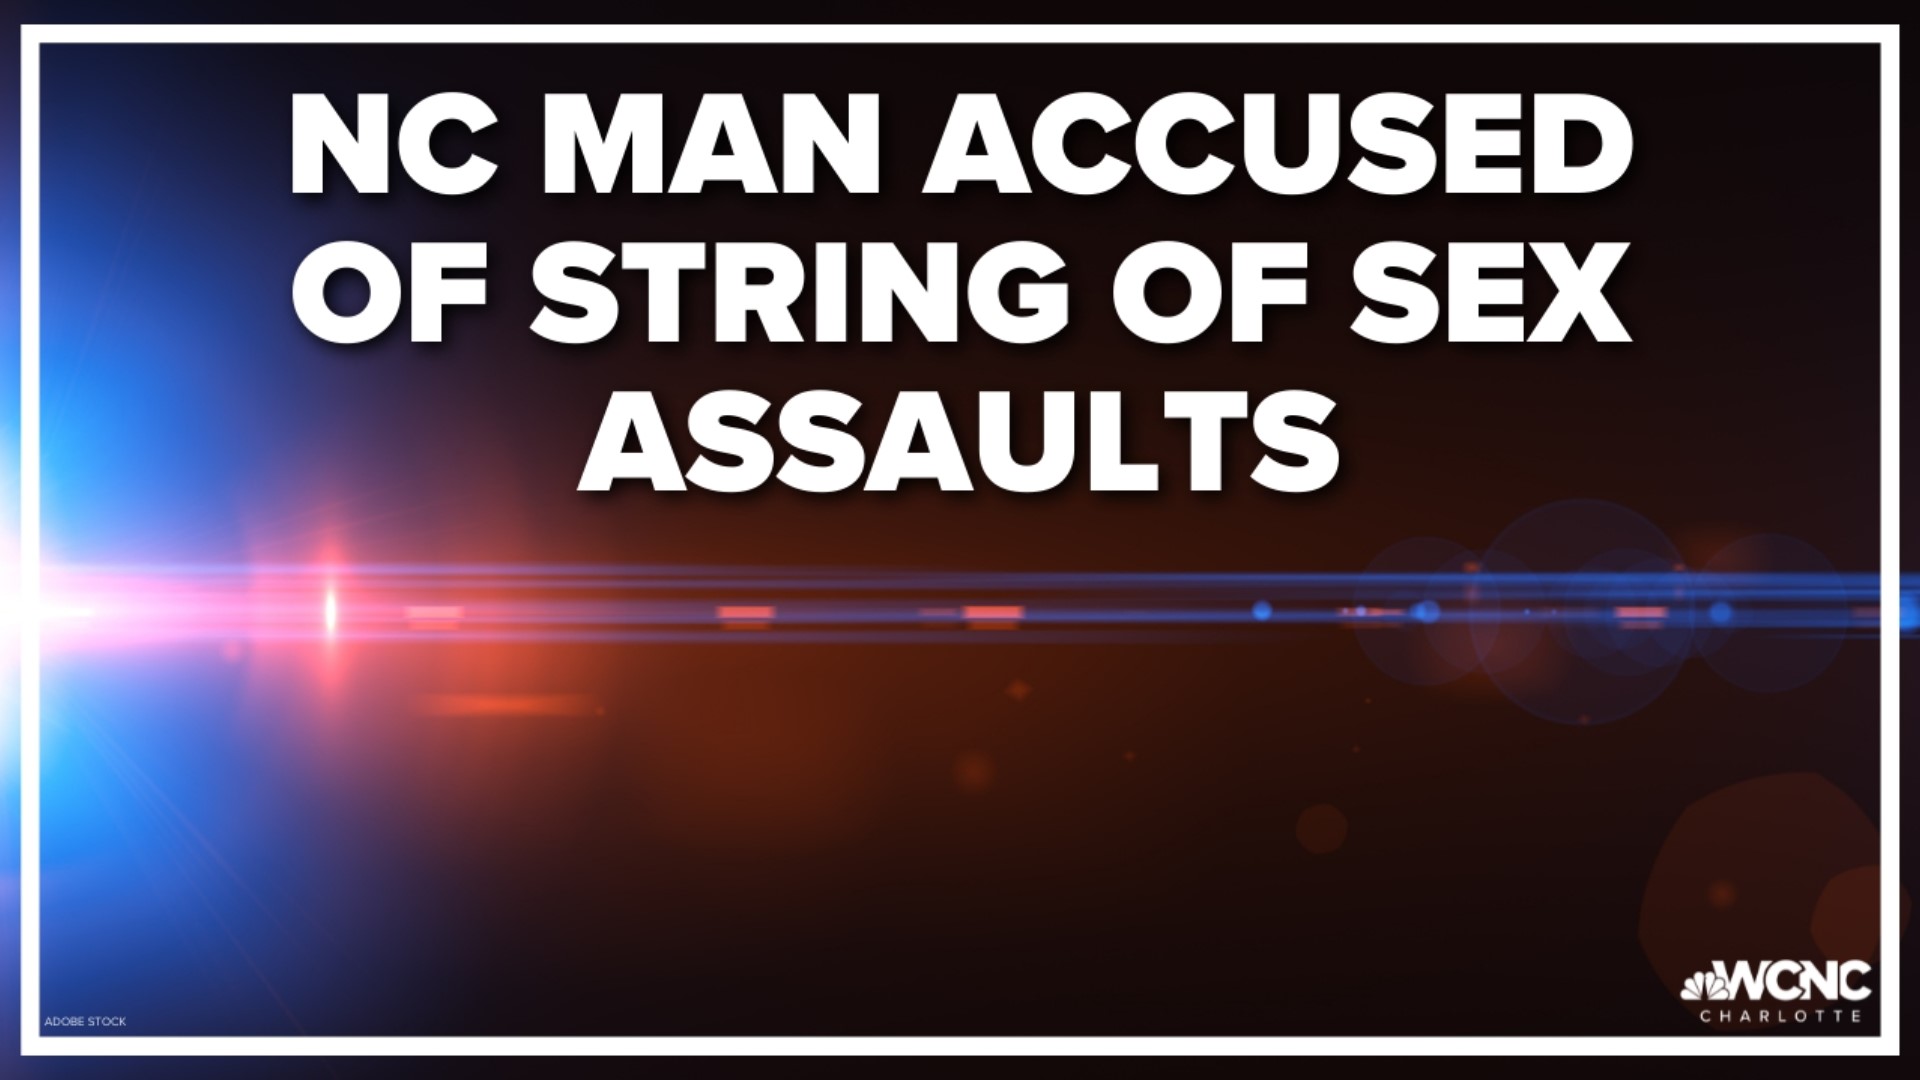 Police arrested a Catawba County man after they say he sexually assaulted multiple women and believe more victims may have been targeted by him.